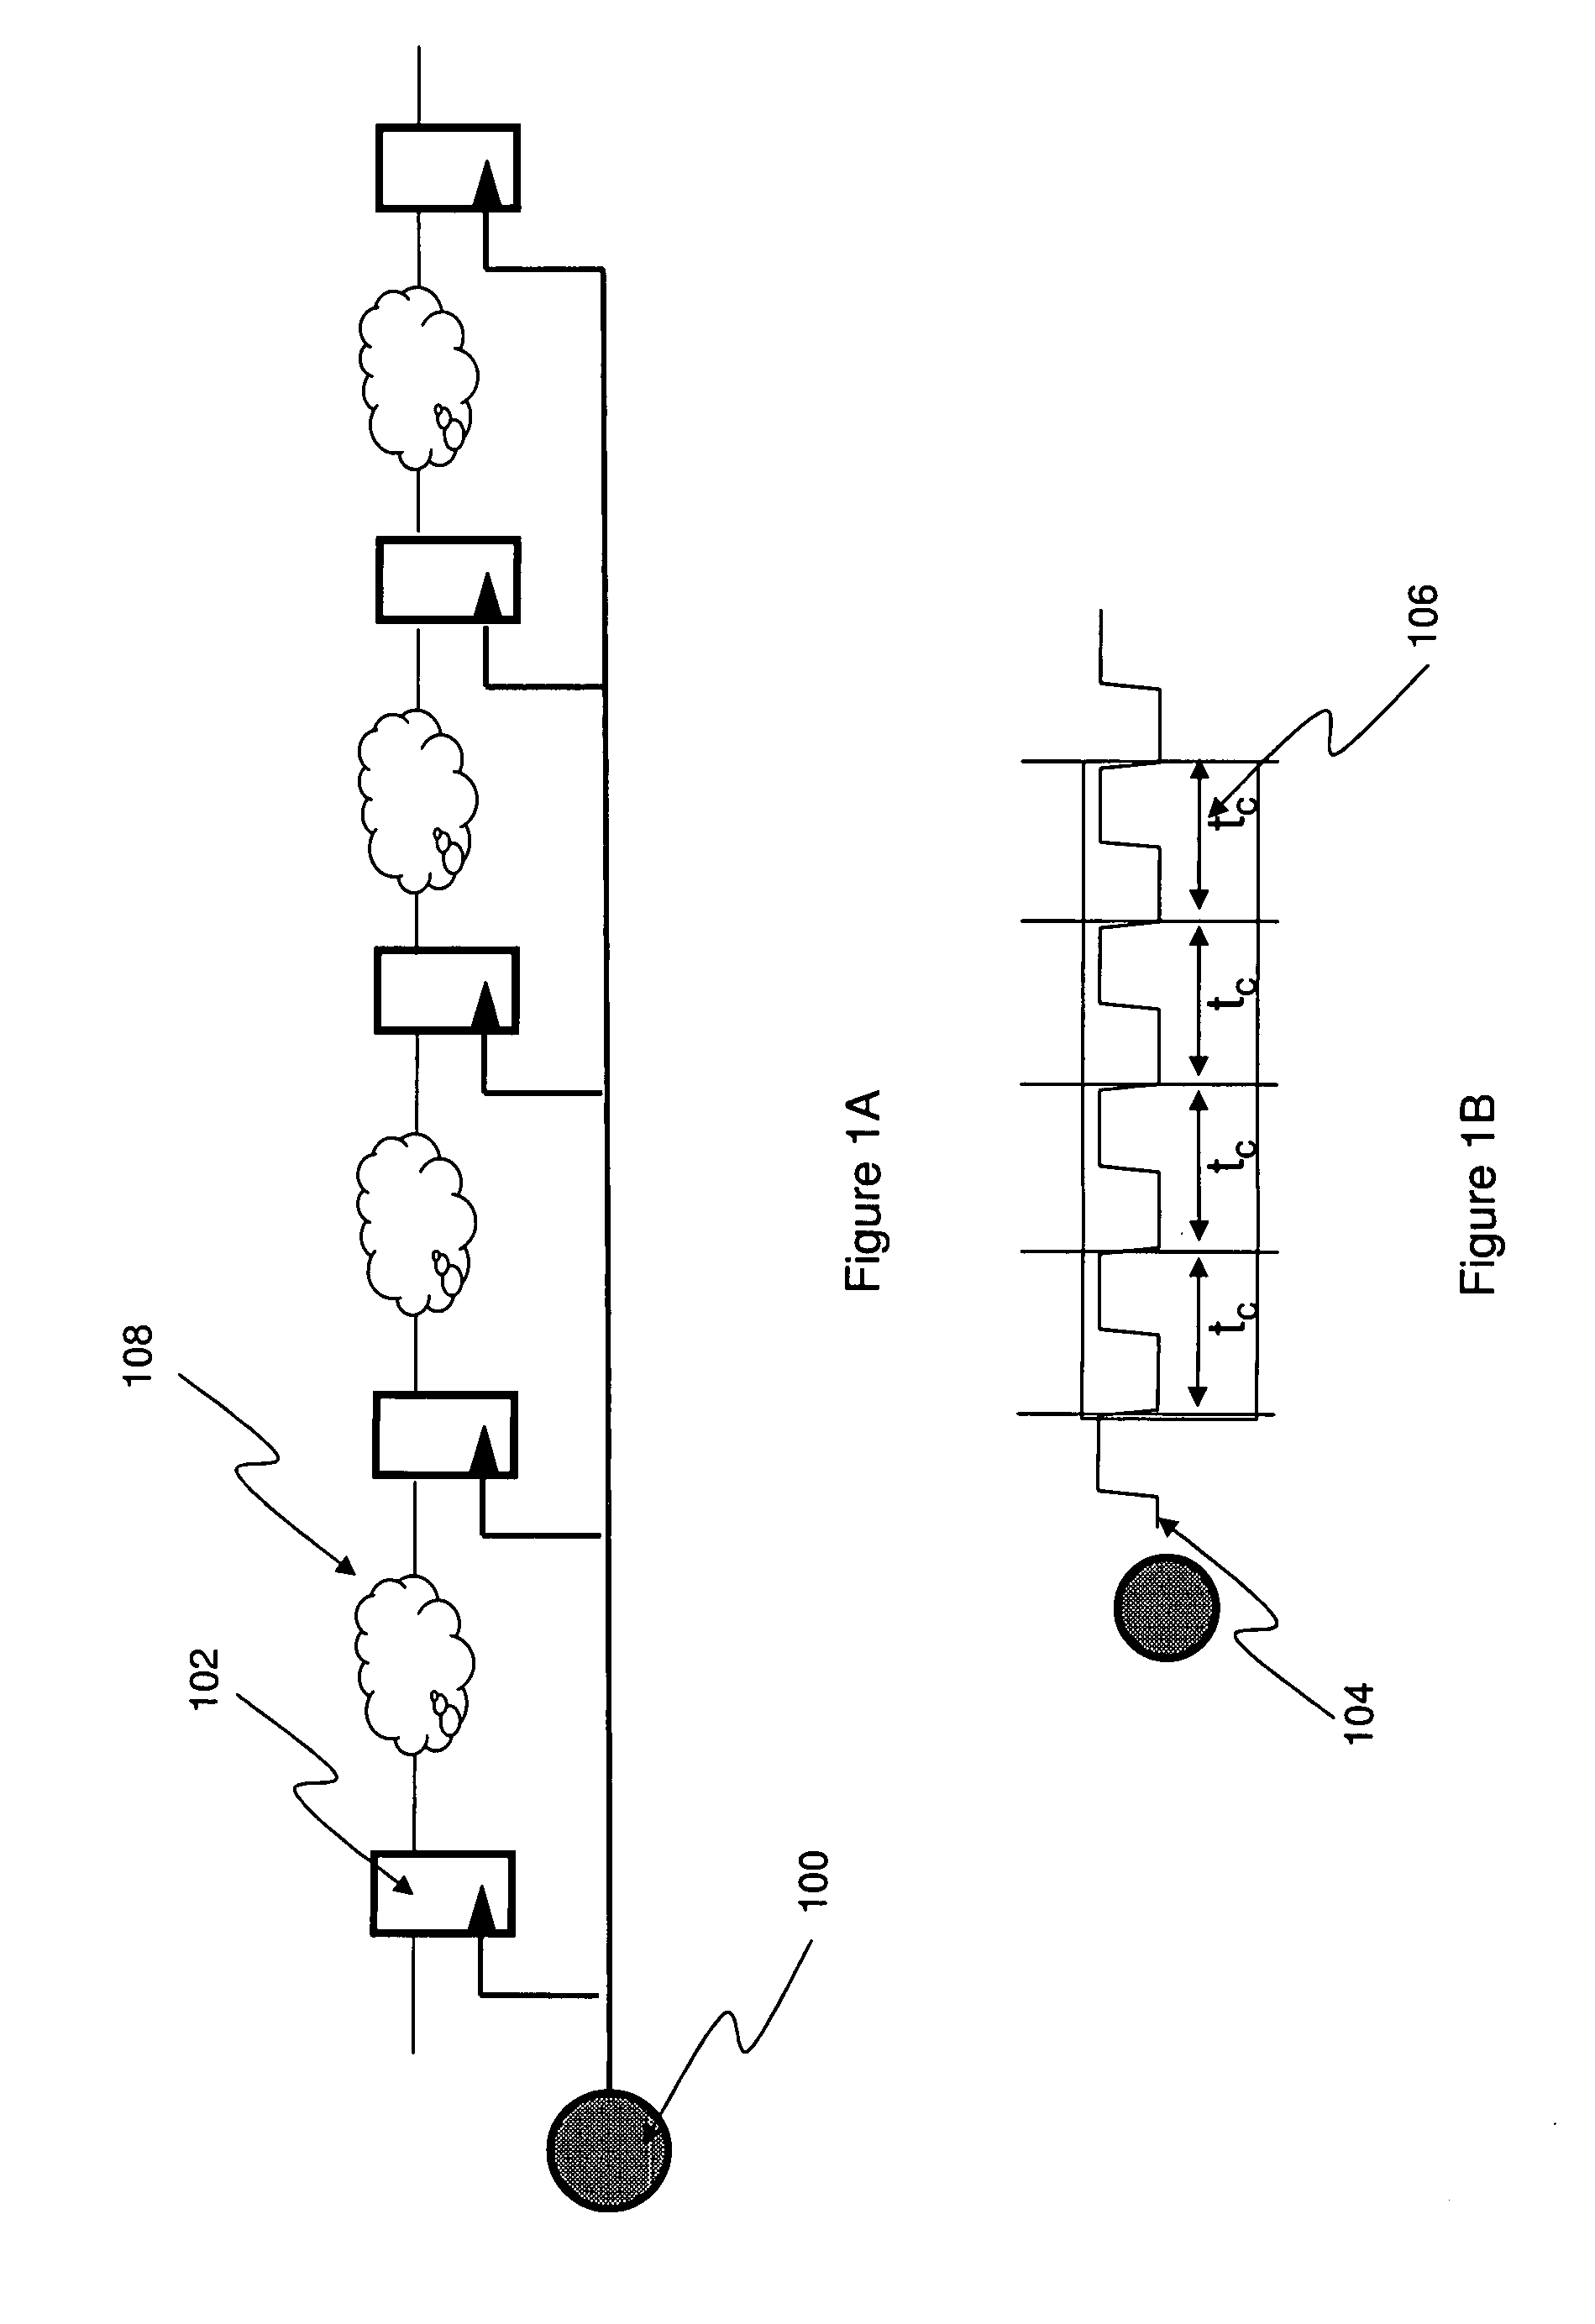 Transition Balancing For Noise Reduction/Di/Dt Reduction During Design, Synthesis, and Physical Design